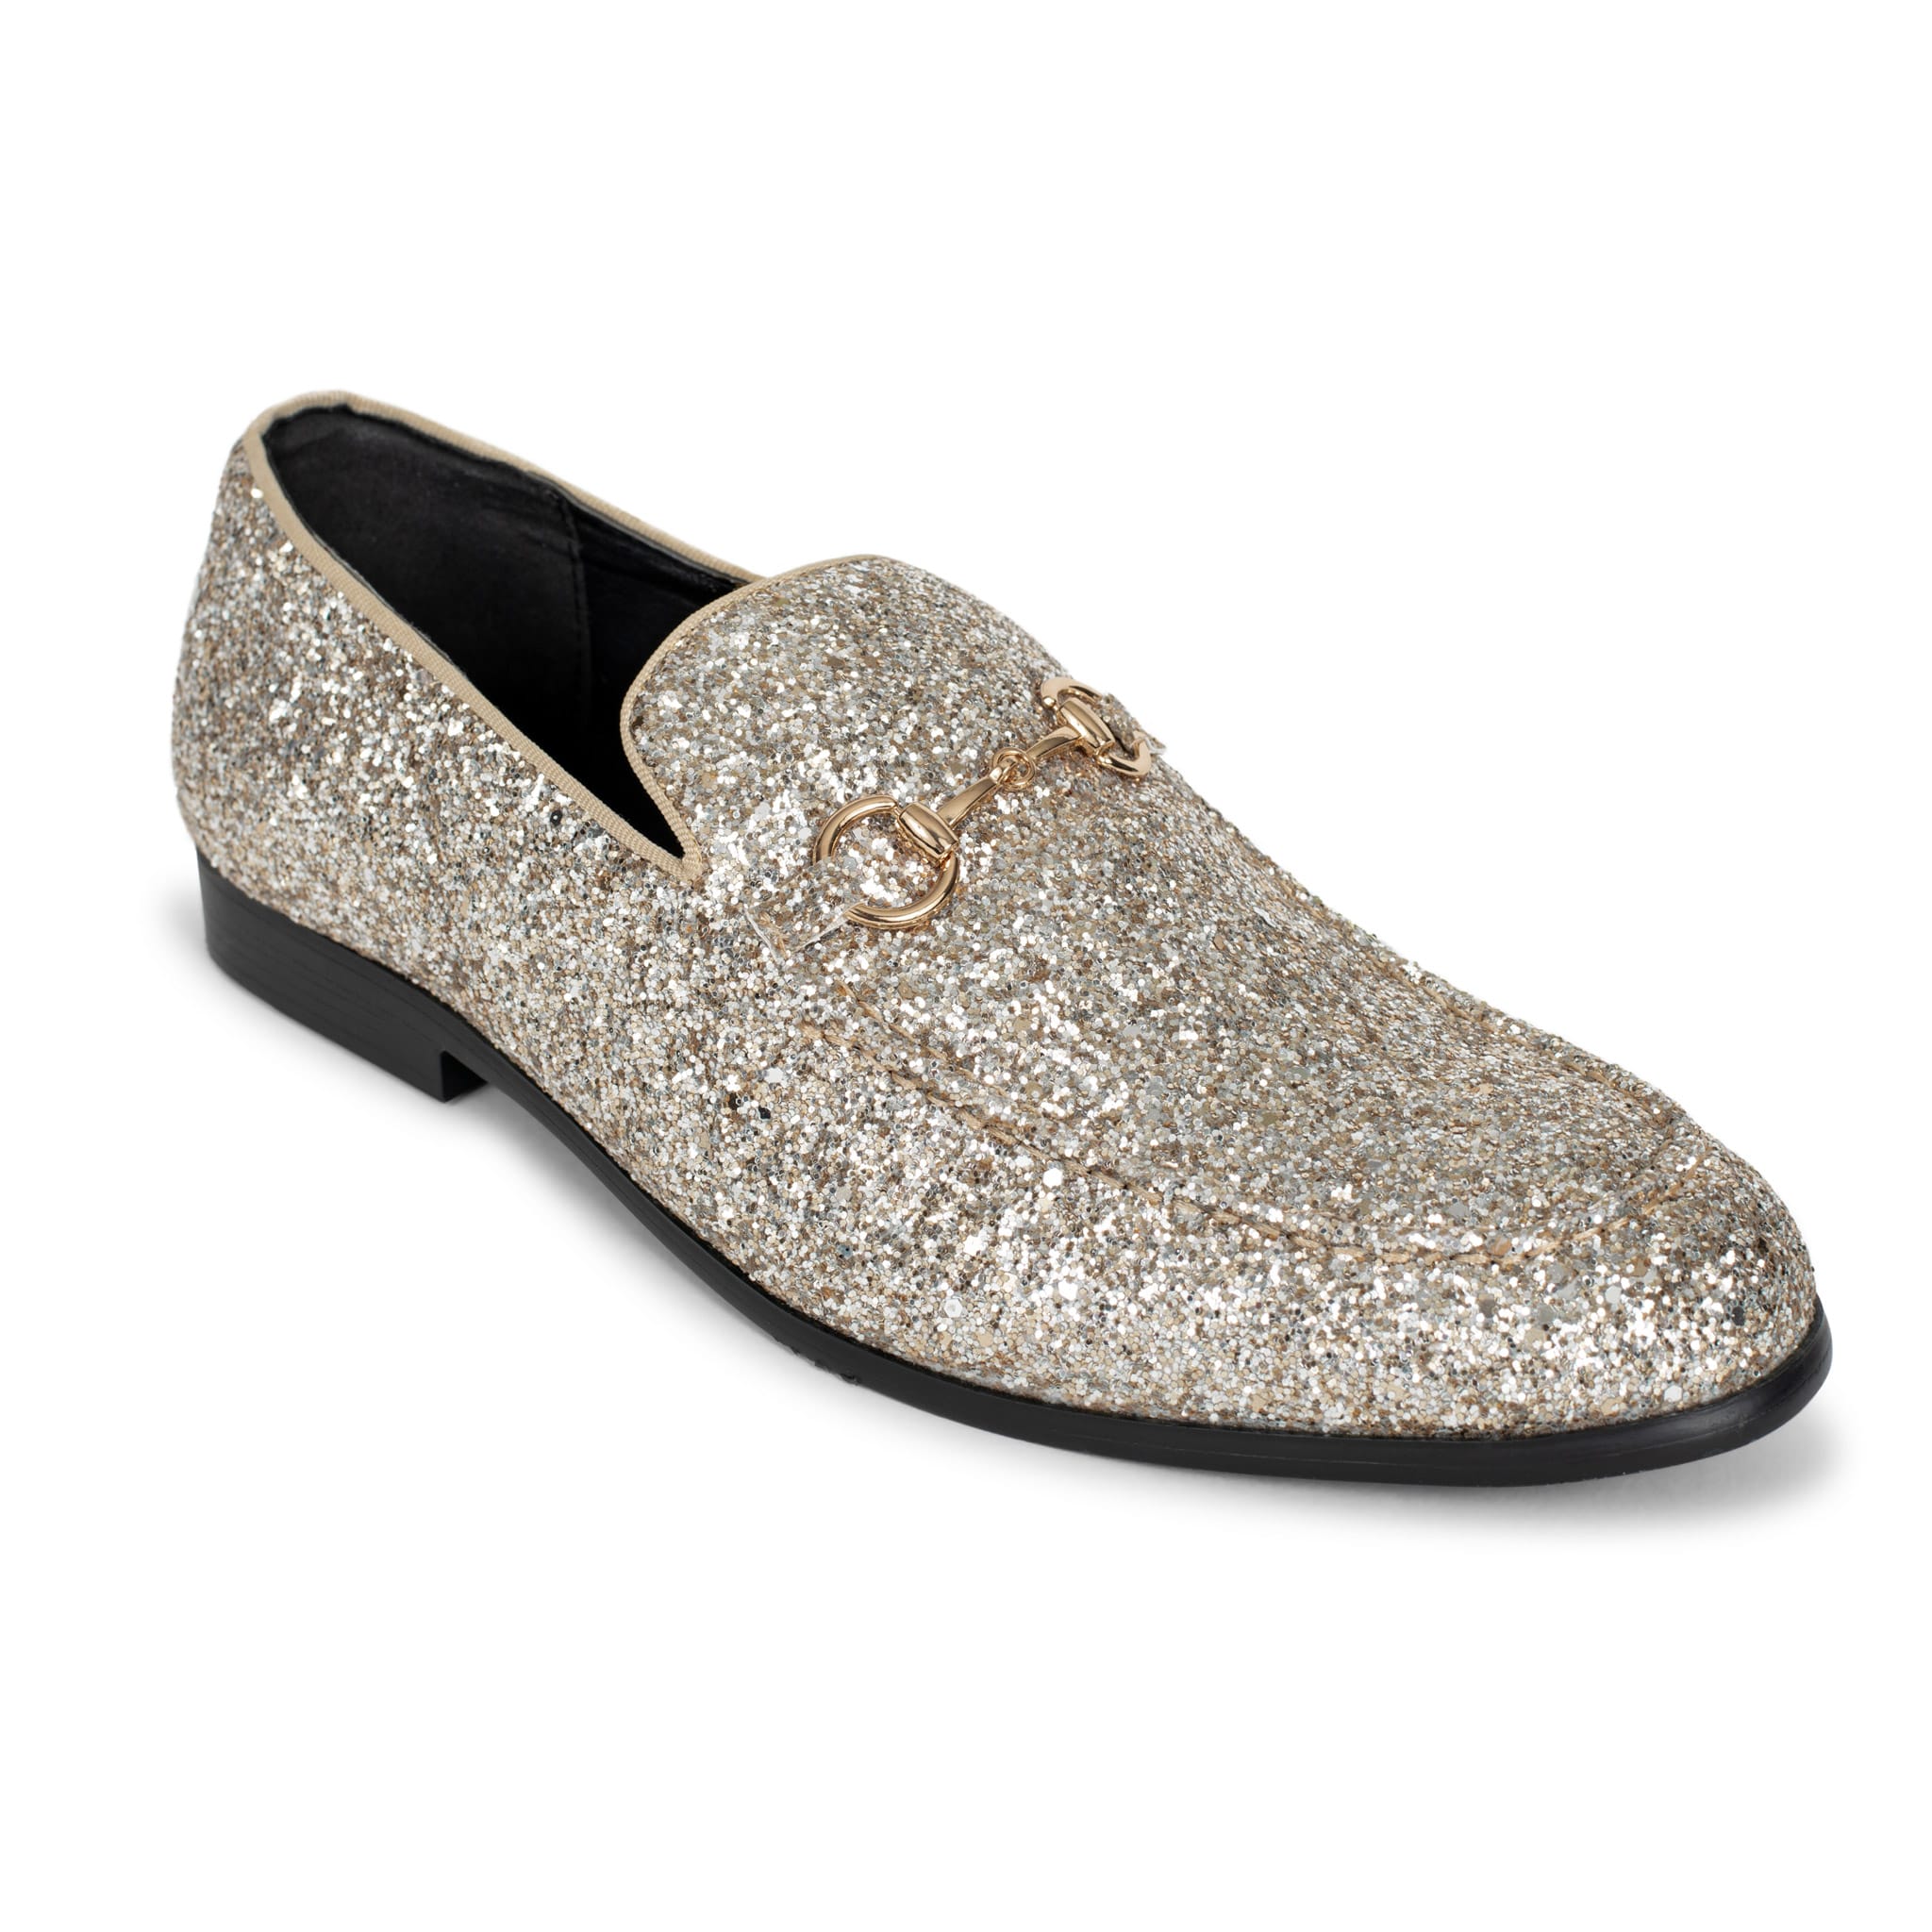 sparkly evening shoes